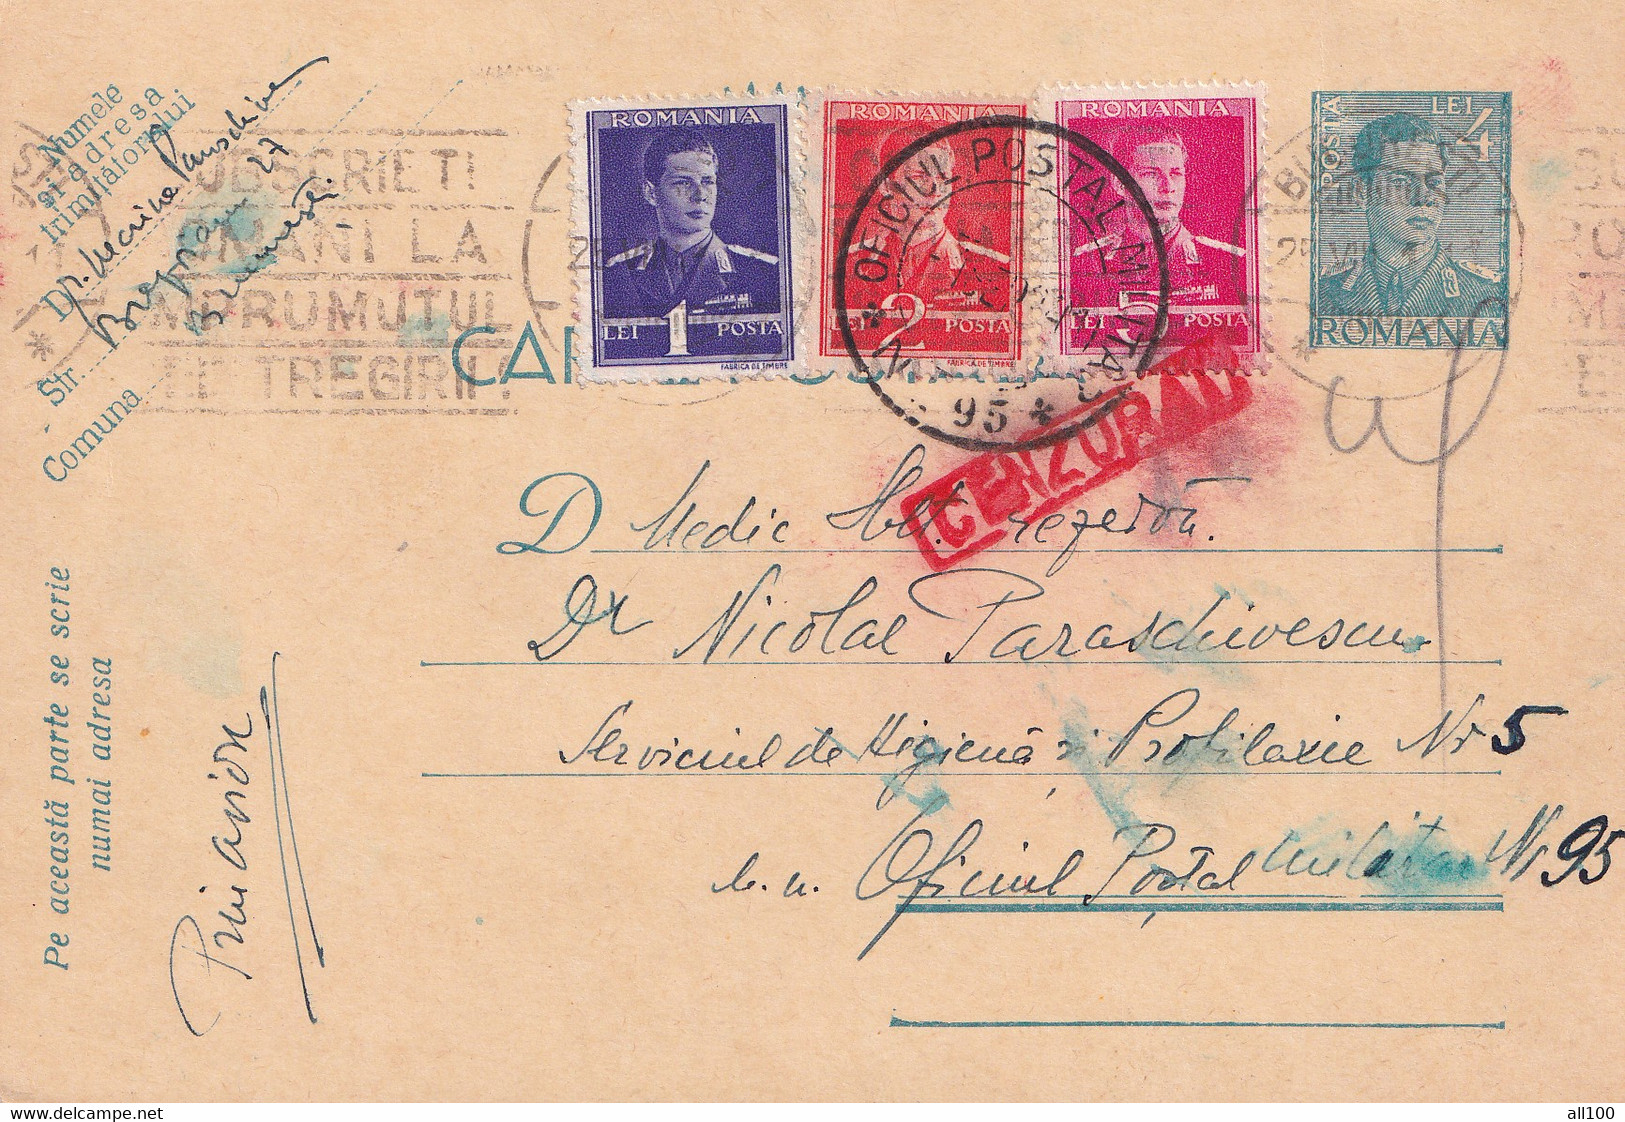 A16437 - MILITARY LETTER POSTAL STATIONERY KING MICHAEL 4 LEI CENZURAT USED 1942 OFICIUL MILITAR 95 - World War 2 Letters